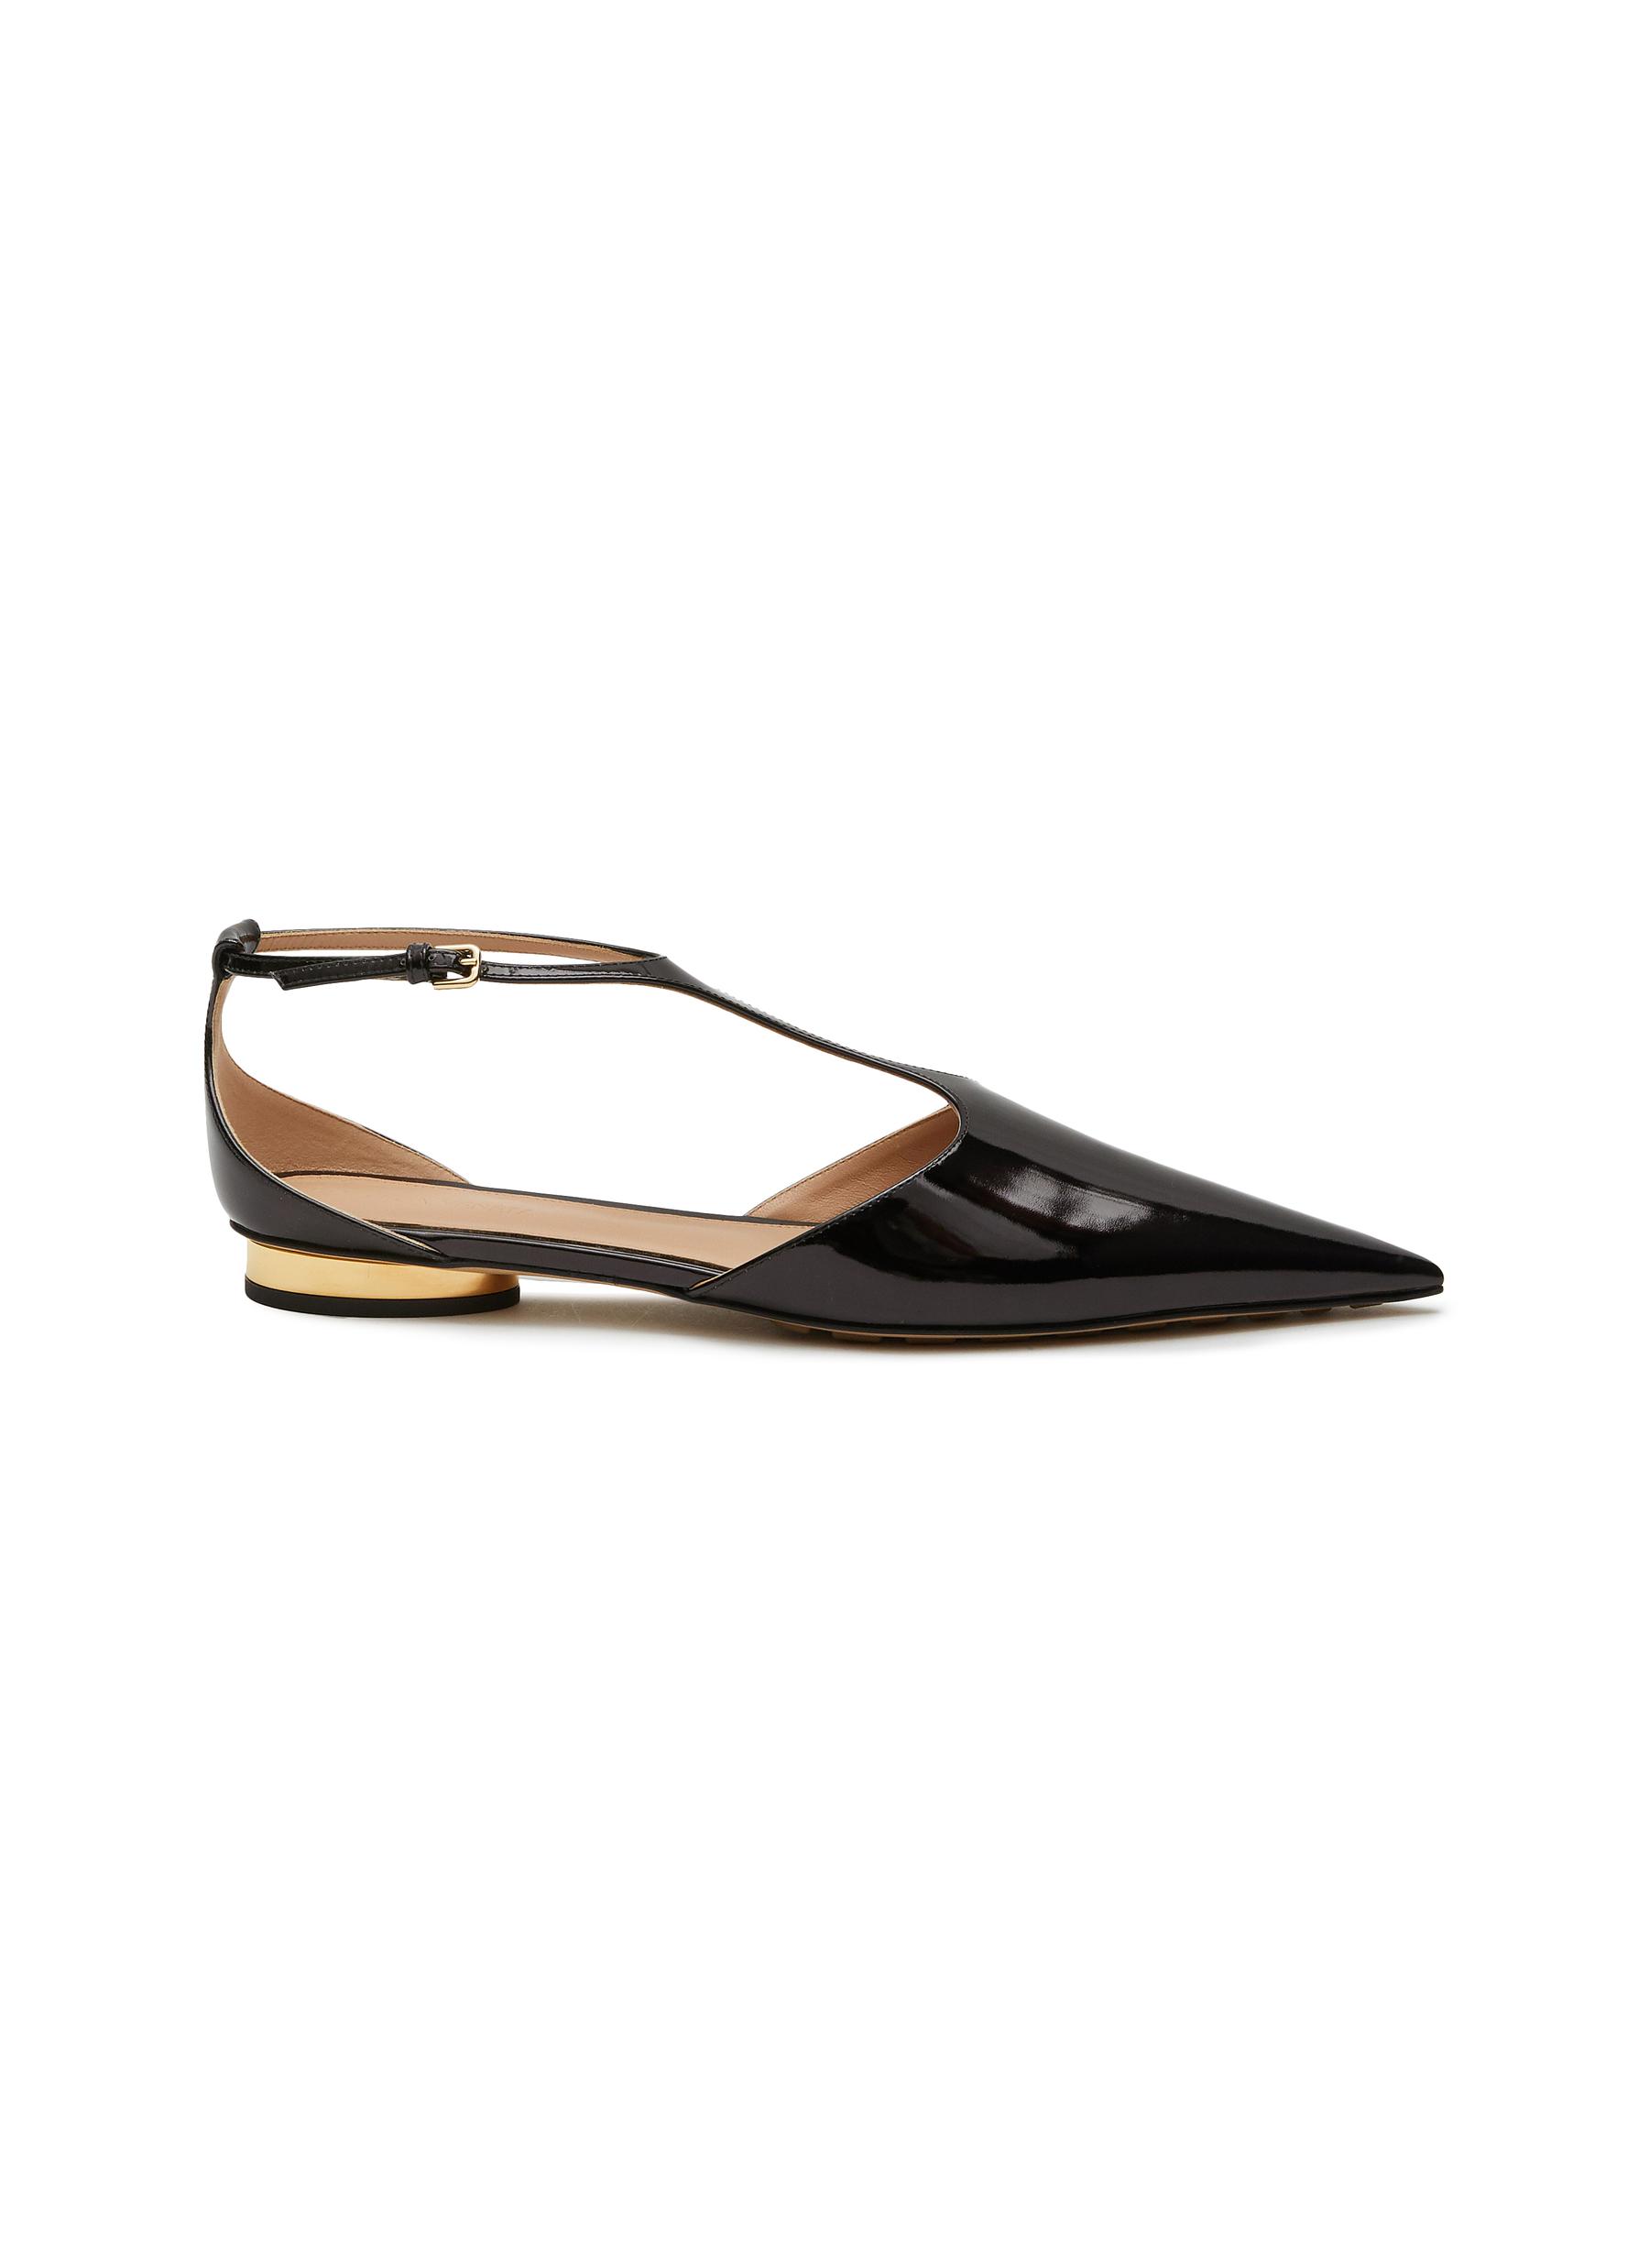 T-Bar Pointed Toe Patent Leather Ballerina Flat